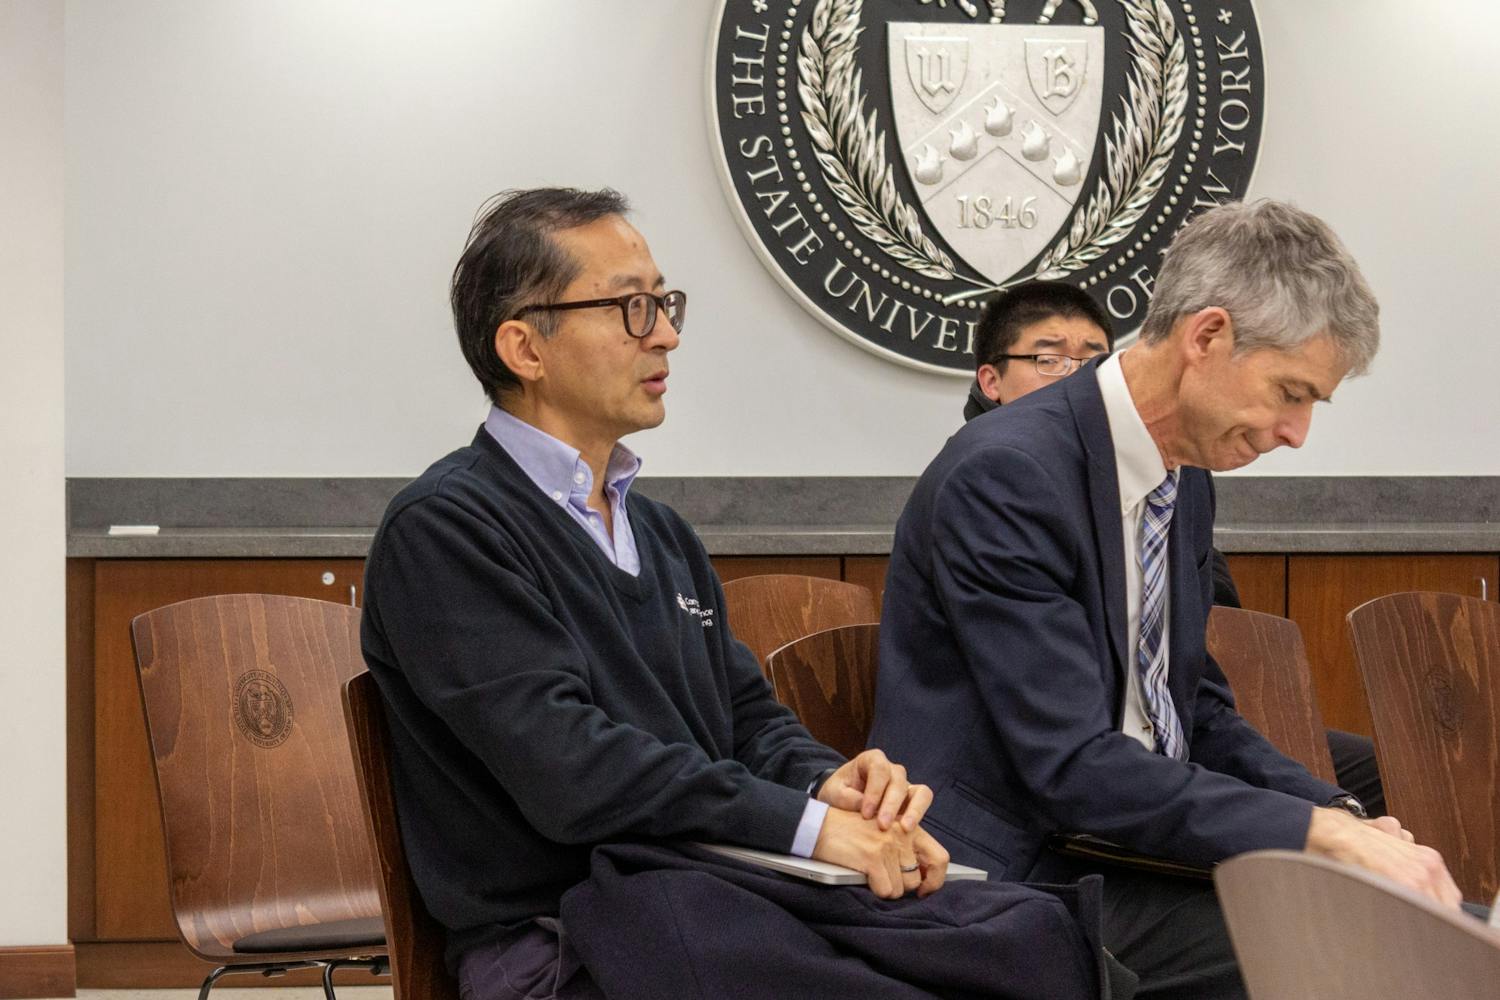 Computer Science and Engineering Department Chair Chunming Qiao provides his opinion on the search for the next engineering dean.